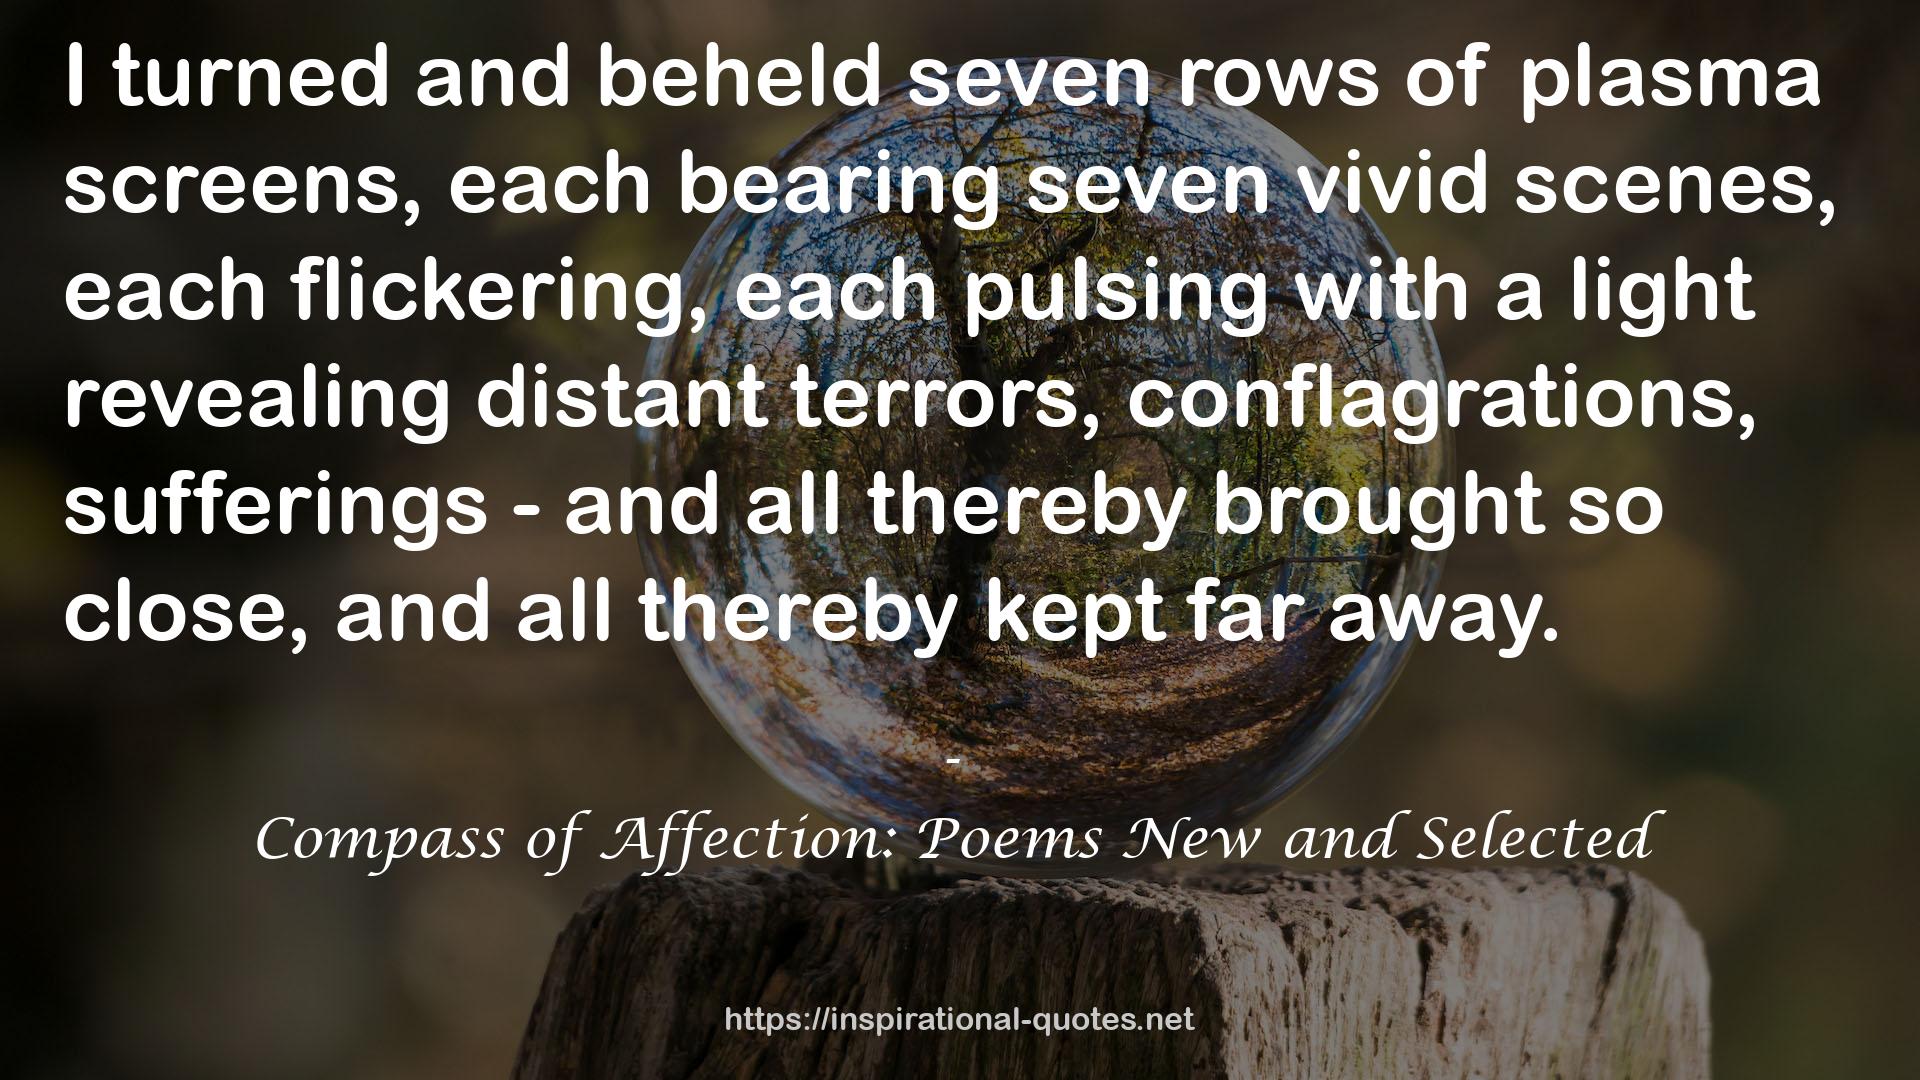 Compass of Affection: Poems New and Selected QUOTES